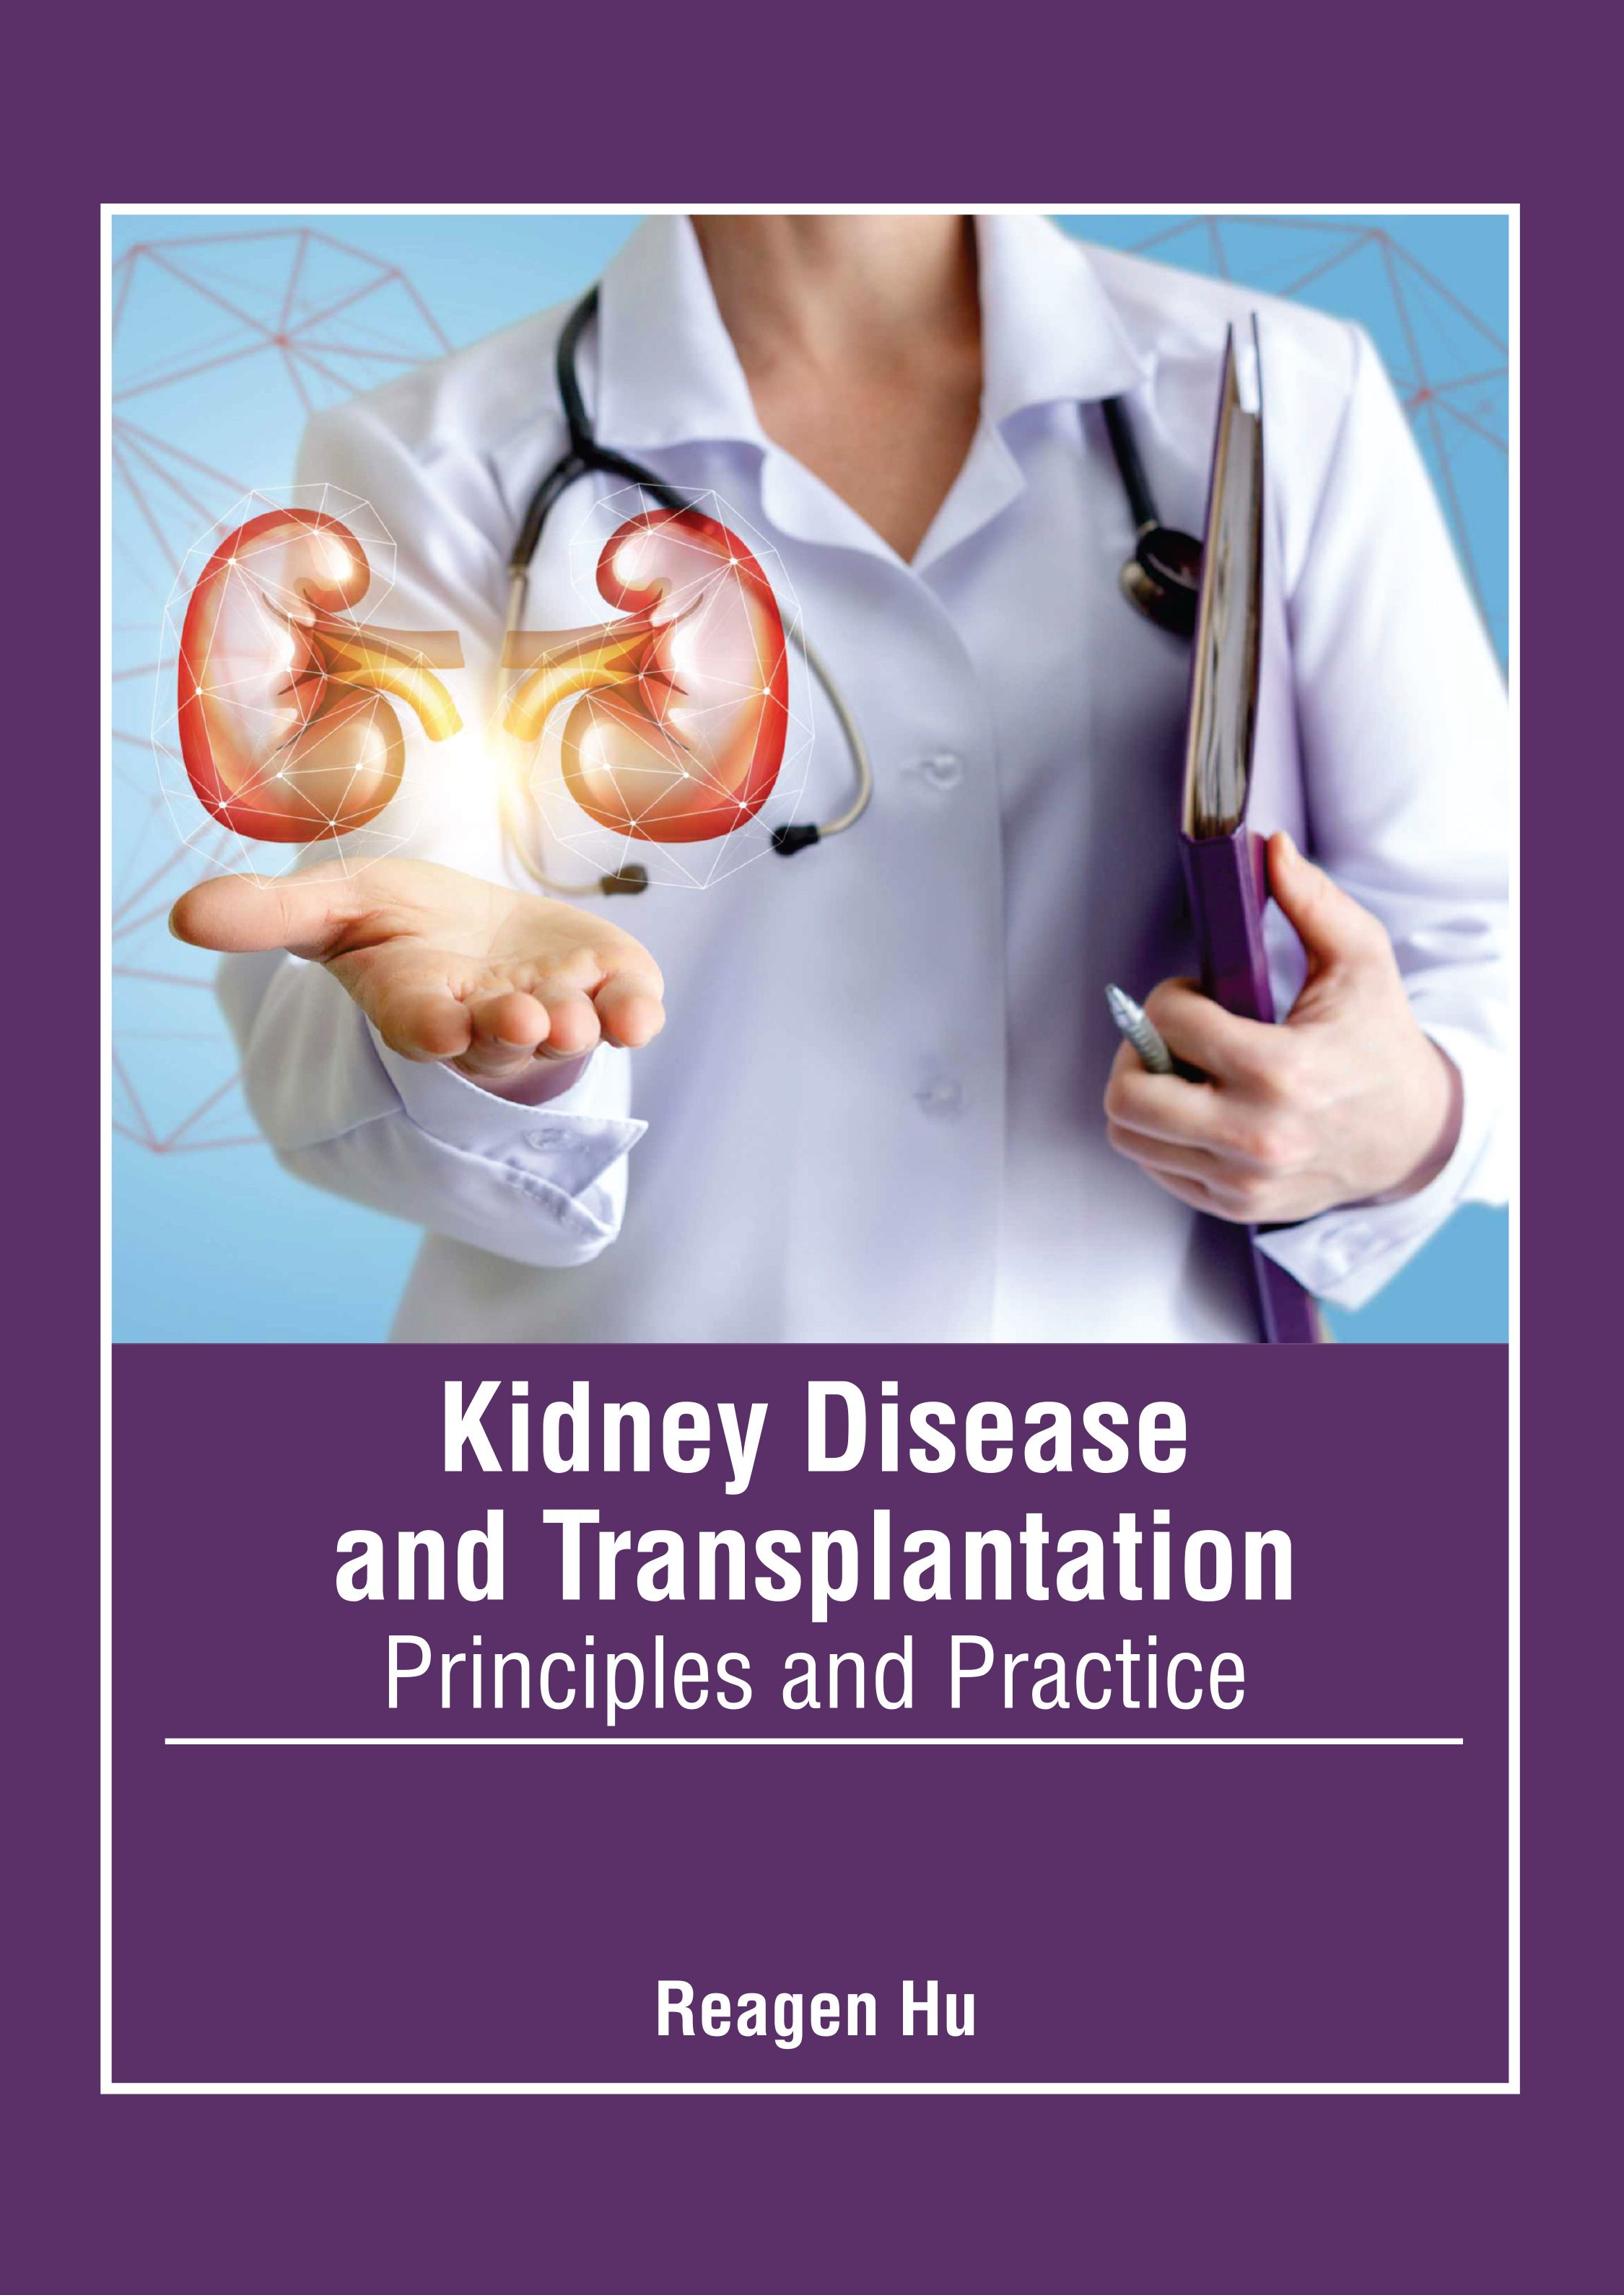 

medical-reference-books/nephrology/kidney-disease-and-transplantation-principles-and-practice-9781639277094